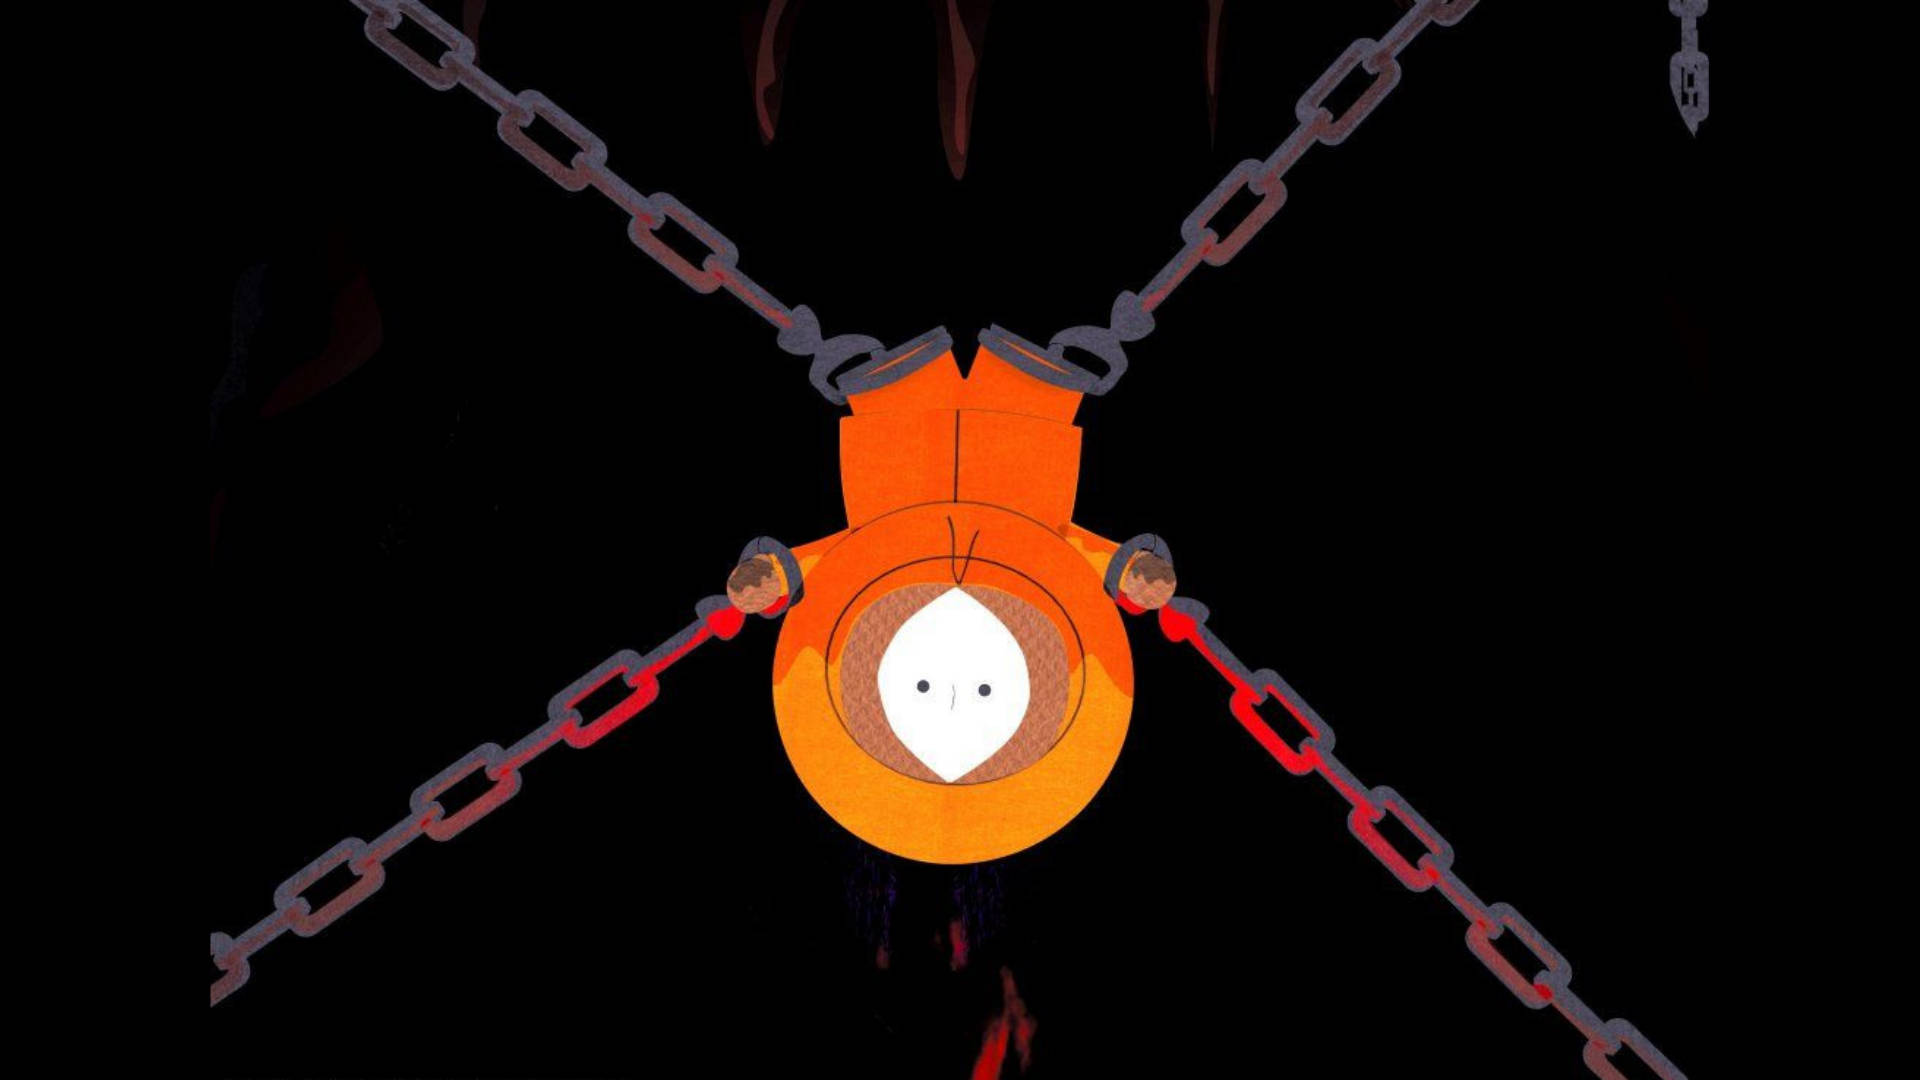 Kenny Mccormick Upside Down Background